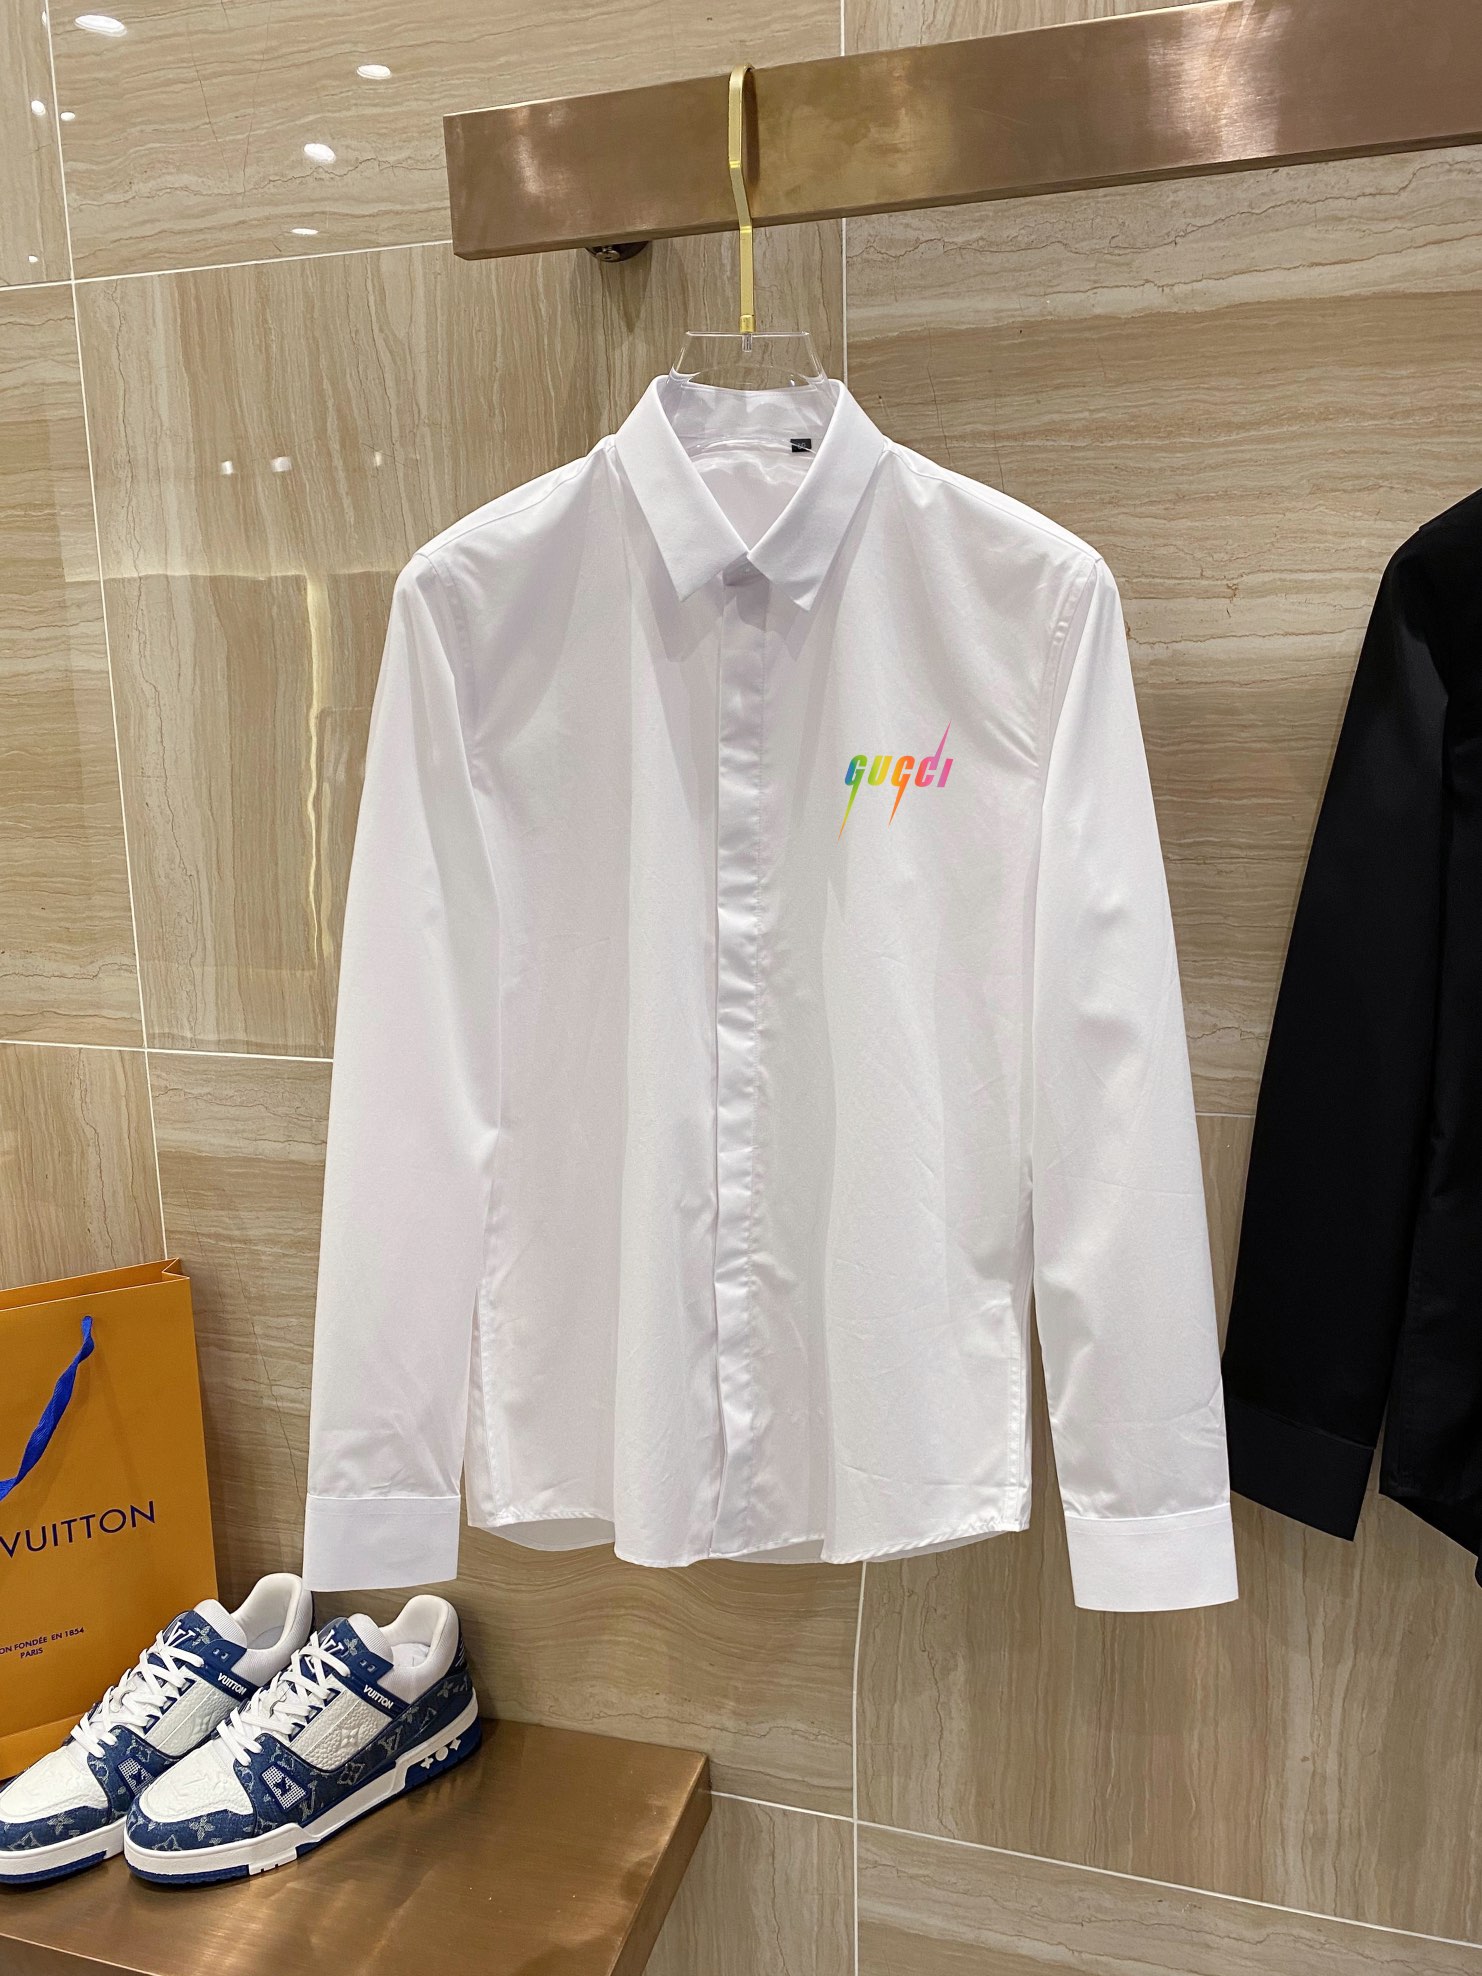 Shop Now
 Gucci Clothing Shirts & Blouses 1:1 Clone
 Black White Men Cotton Fall Collection